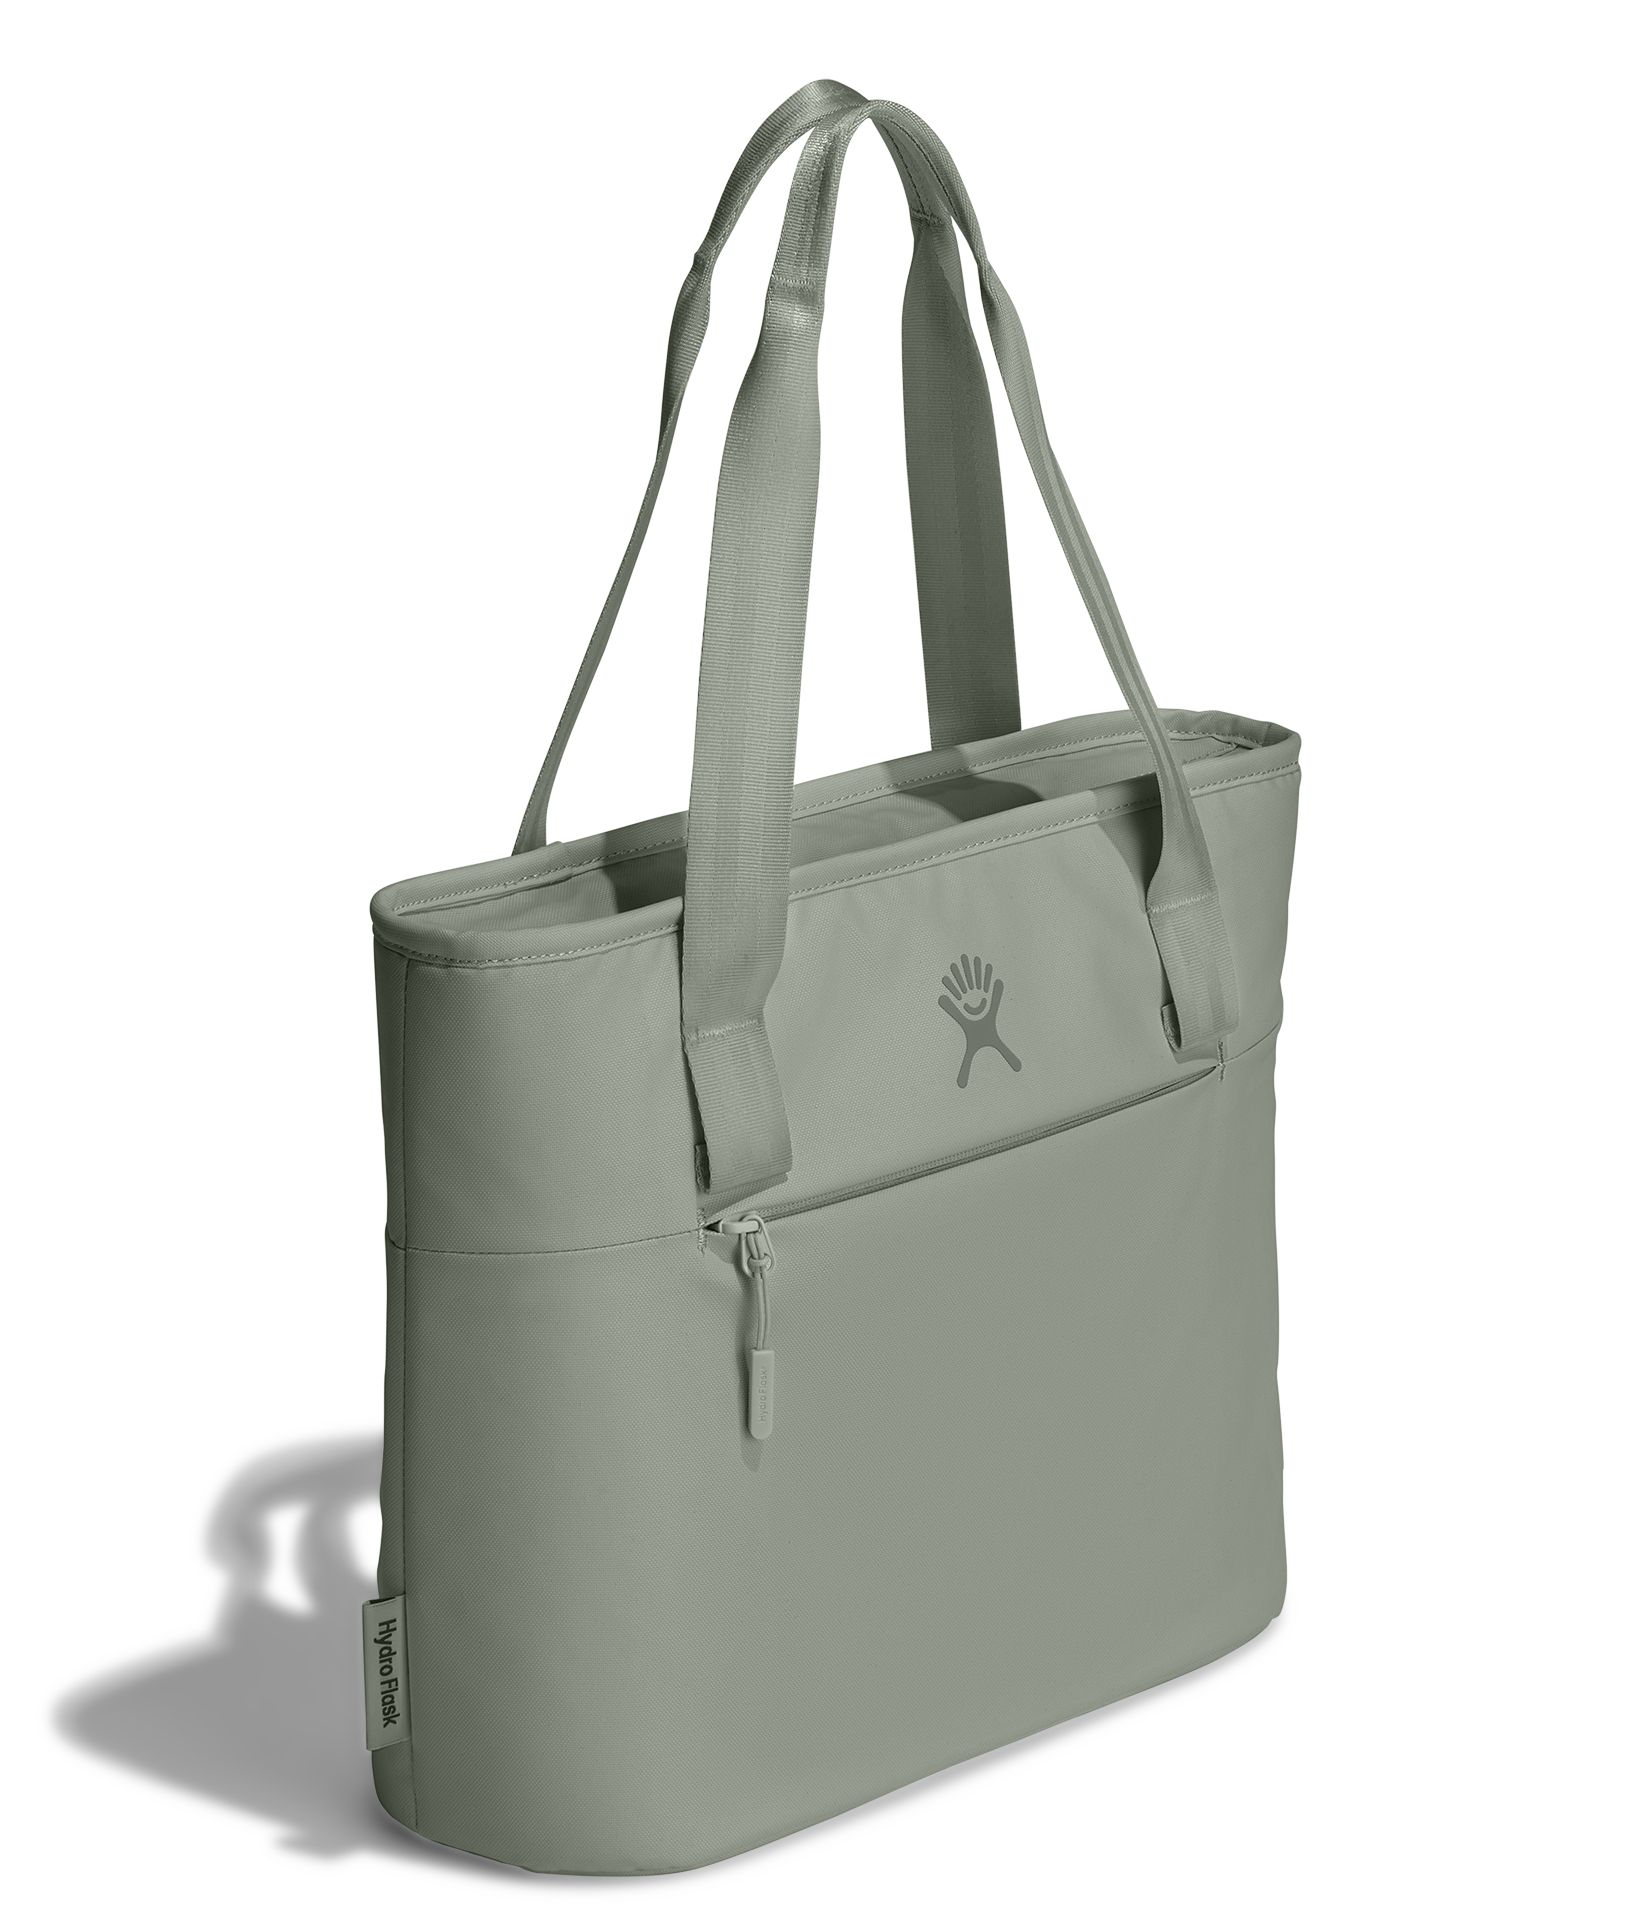 Image of Hydro Flask 8L Insulated Tote Bag